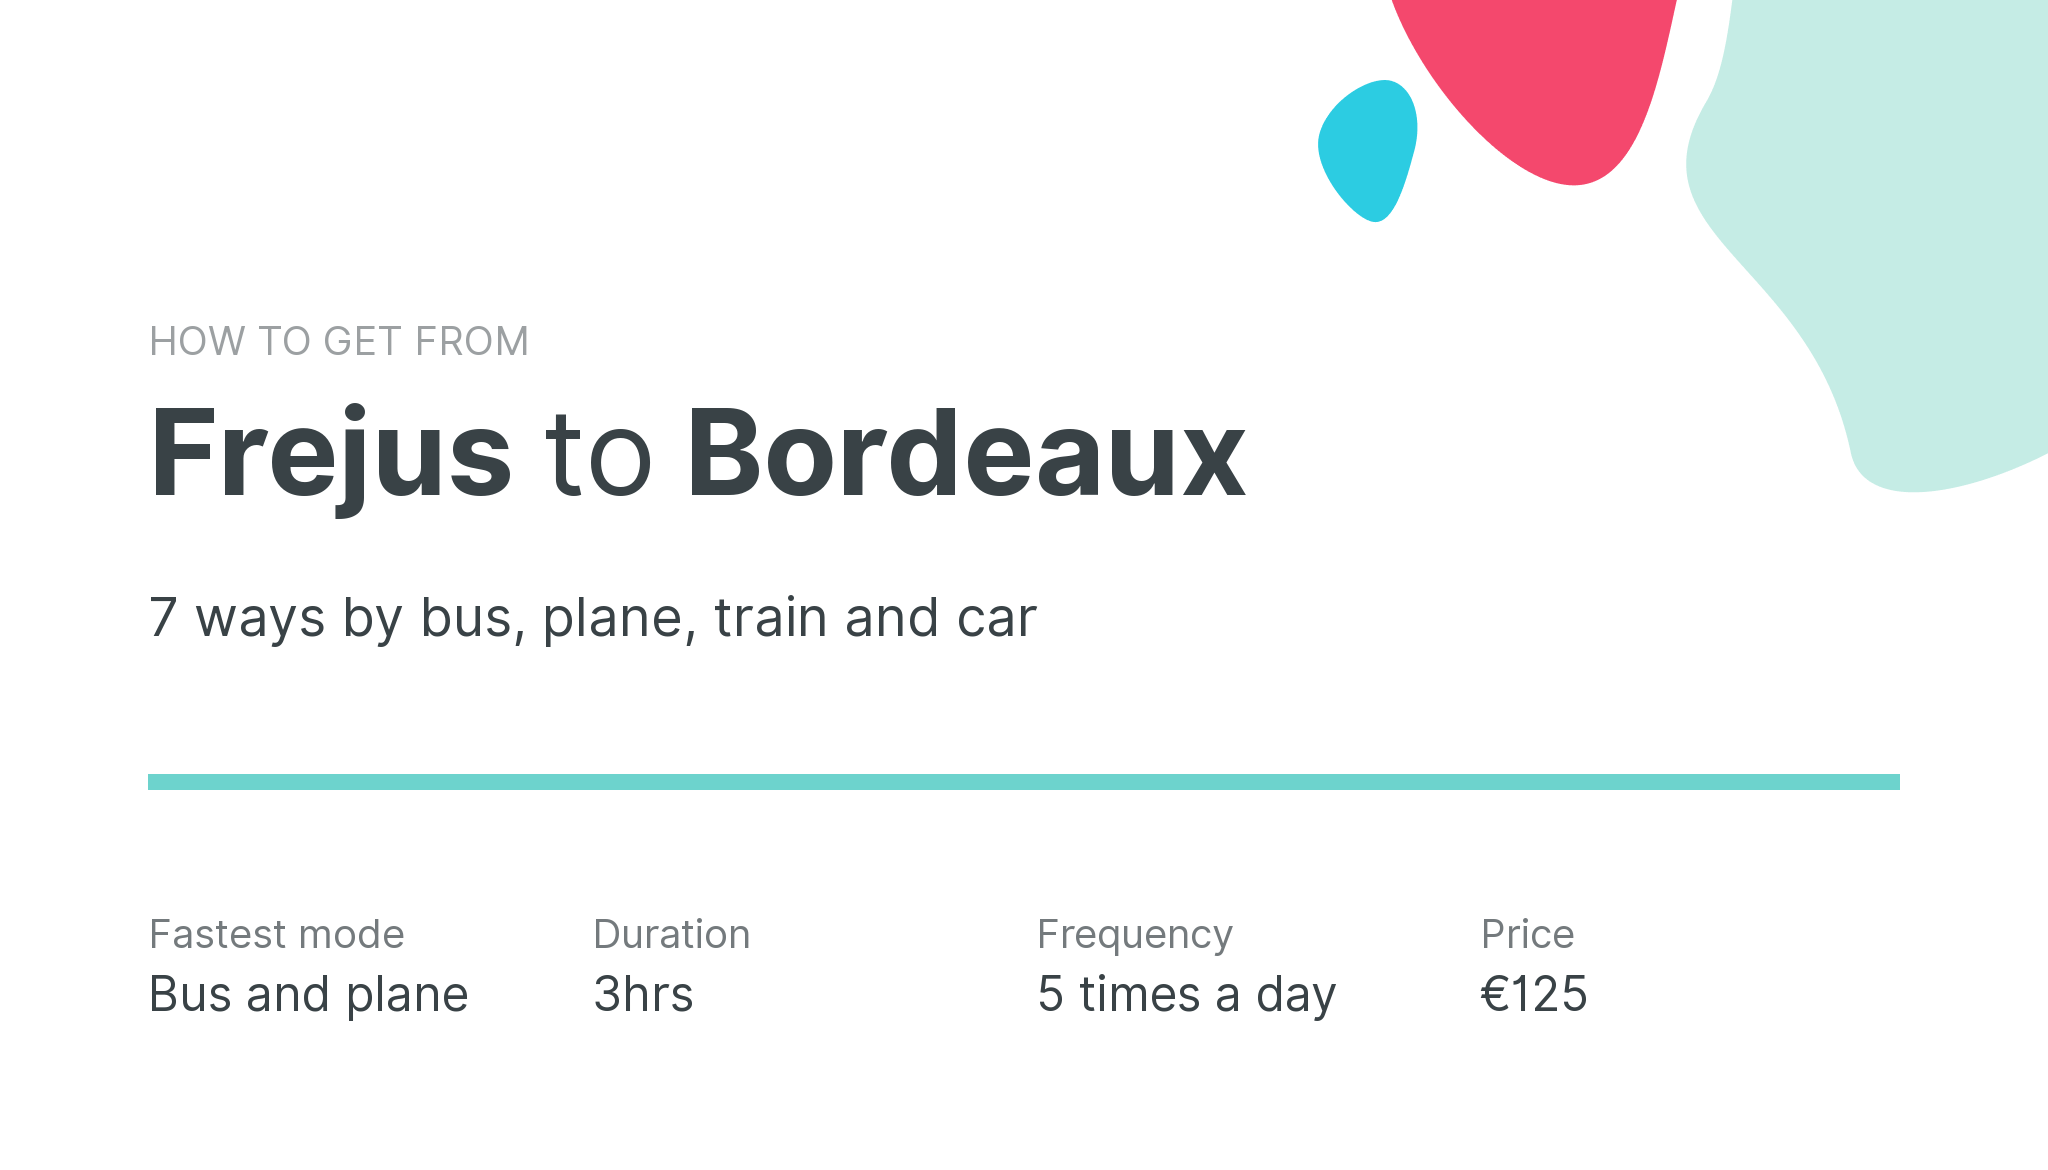 How do I get from Frejus to Bordeaux